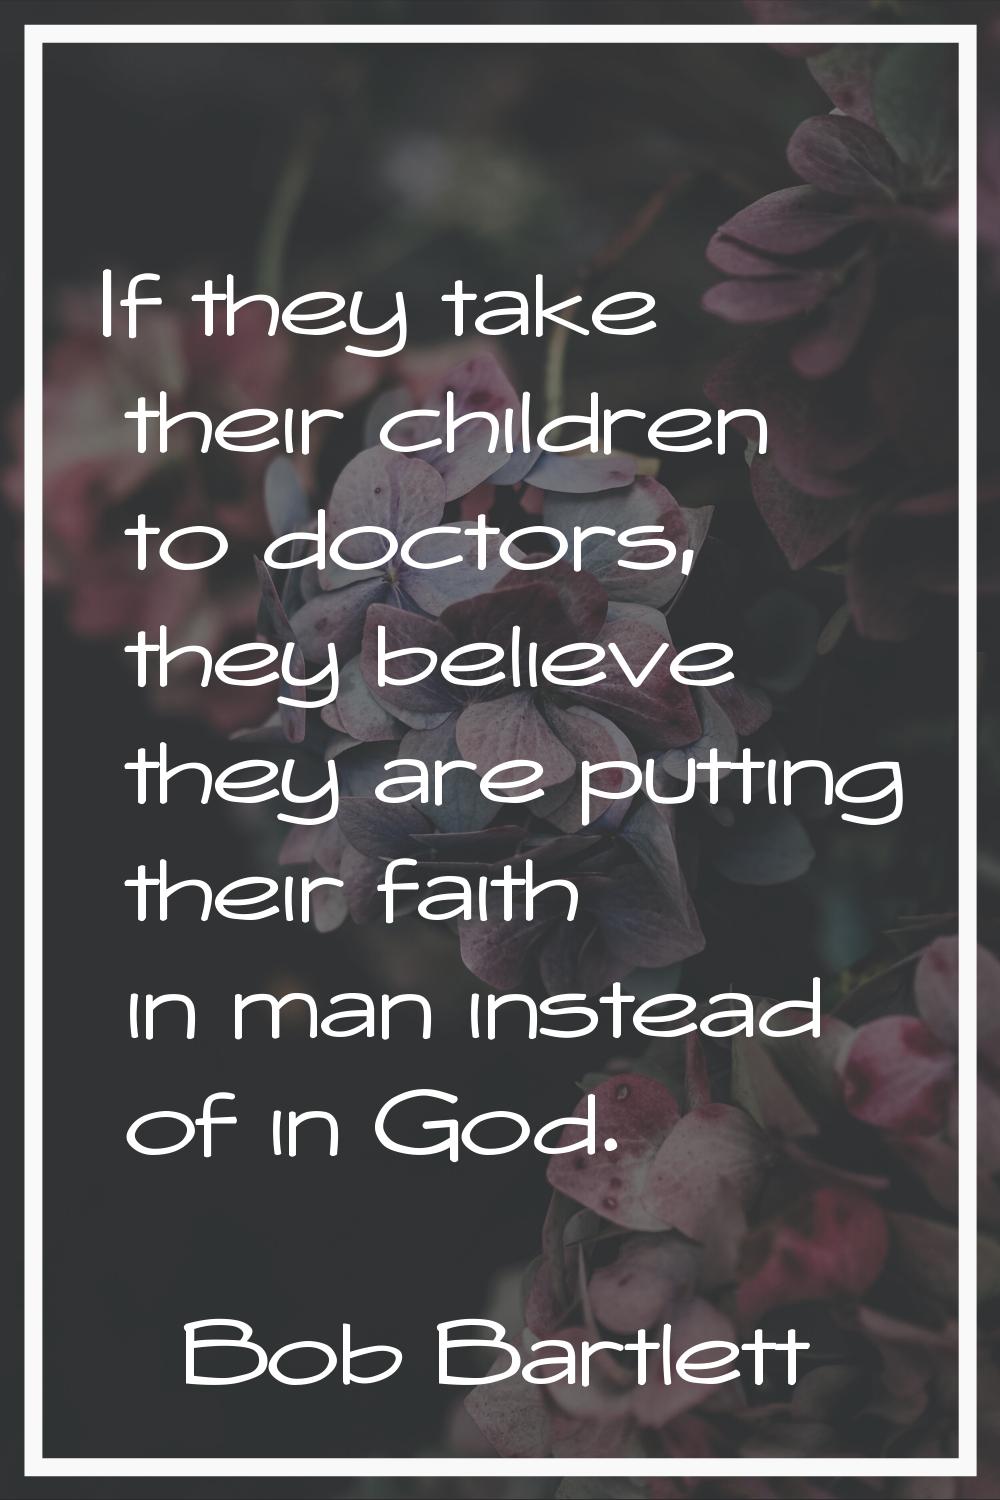 If they take their children to doctors, they believe they are putting their faith in man instead of